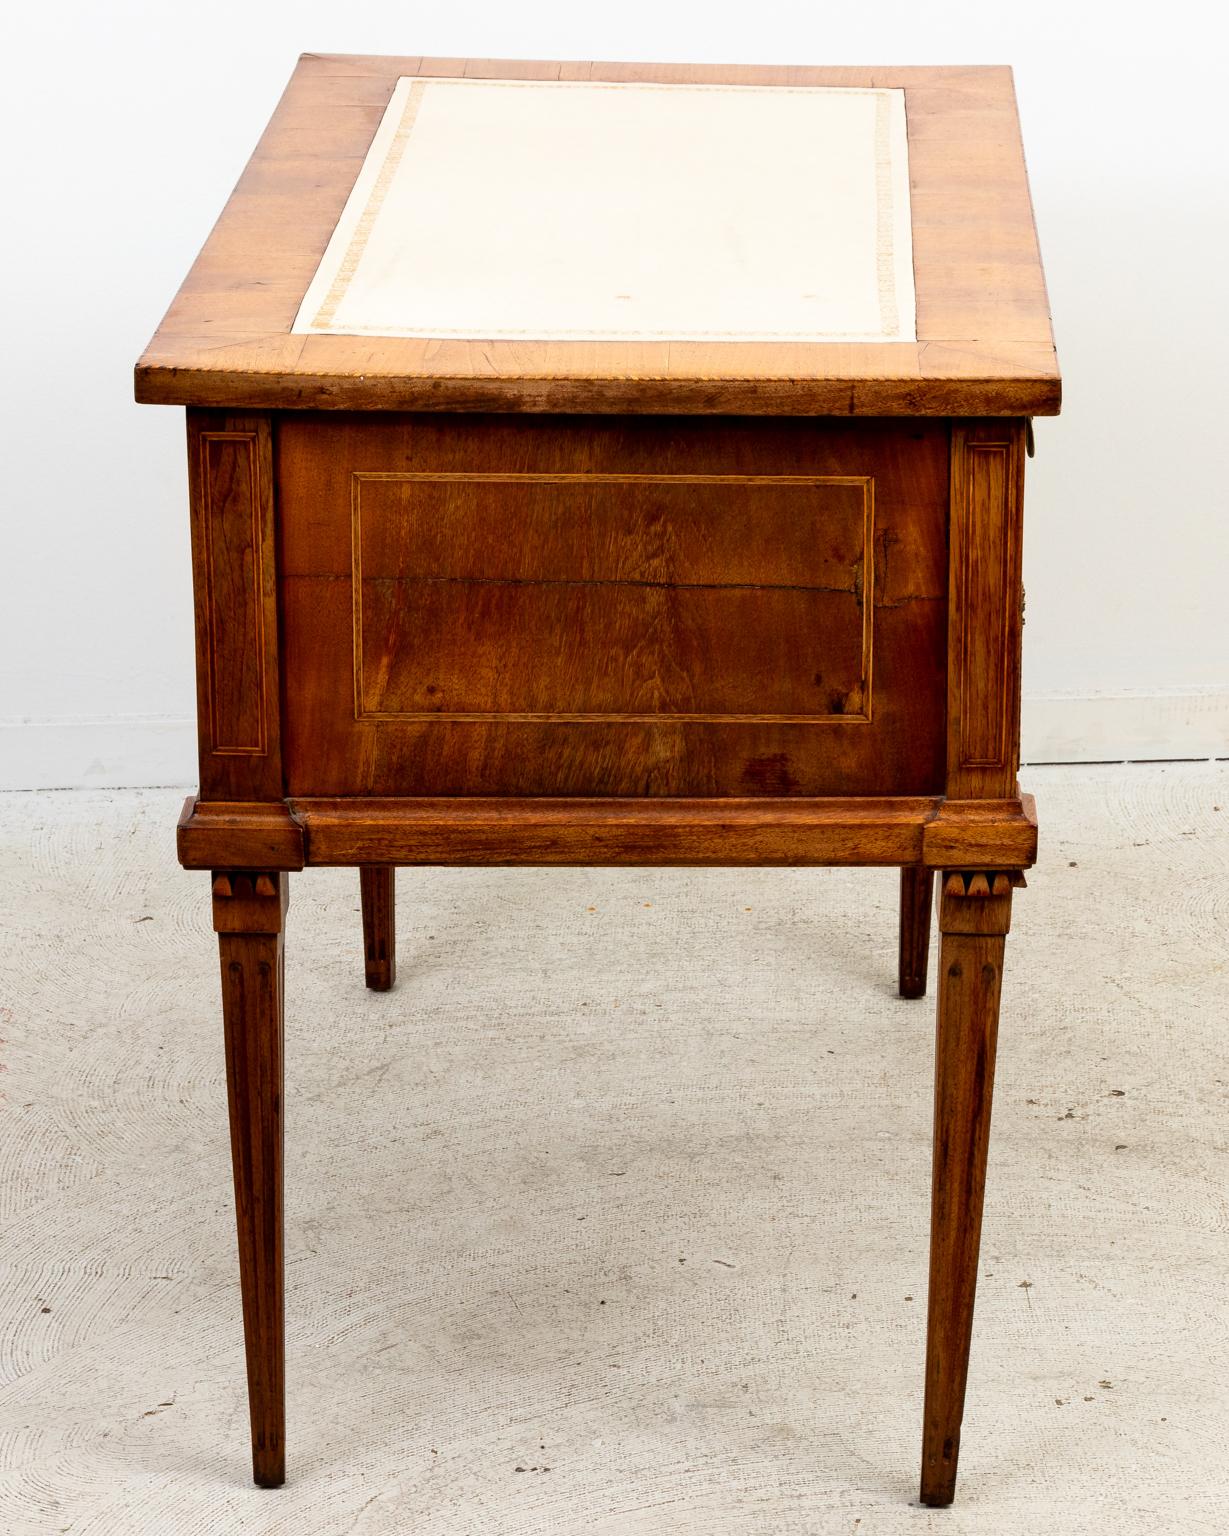 Circa late 19th century French Louis XVI style fruitwood desk with white leather embossed top. The desk features three drawers and metal wreath shaped escutcheon tapered legs. Made in France. Please note of wear consistent with age, Key included.